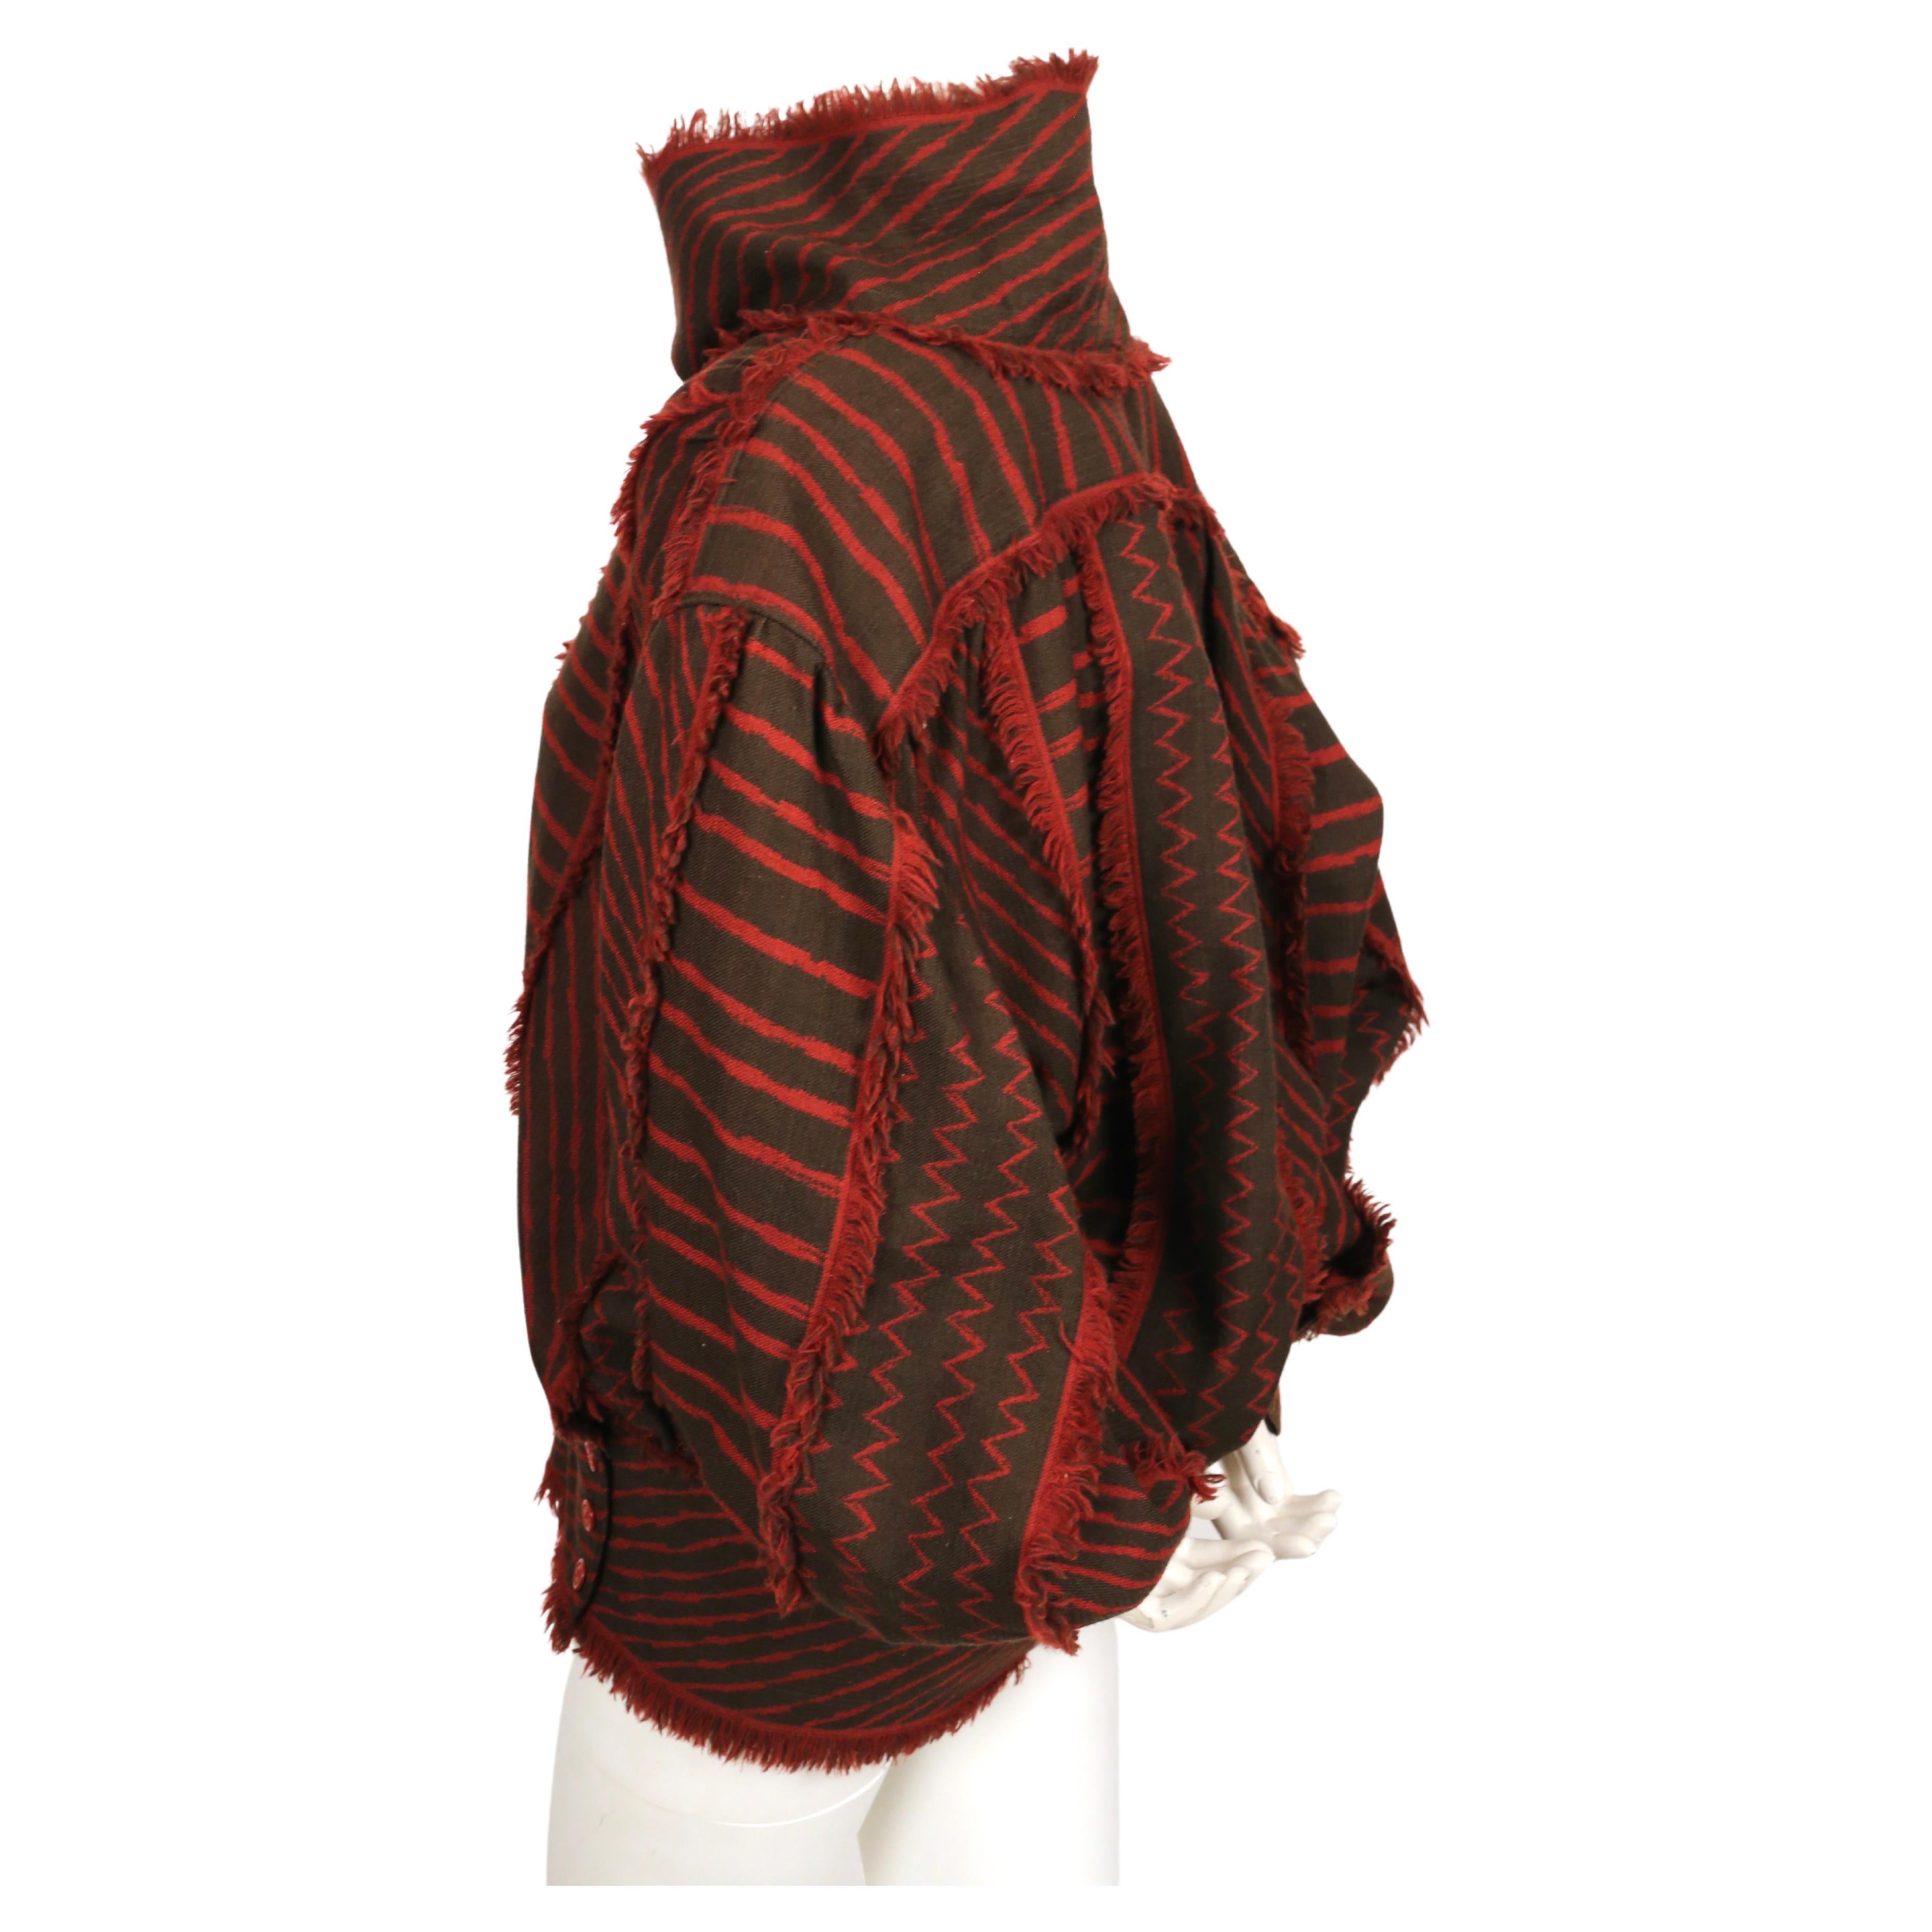 1982 ISSEY MIYAKE African Samurai style tunic in woven mudcloth For Sale 1